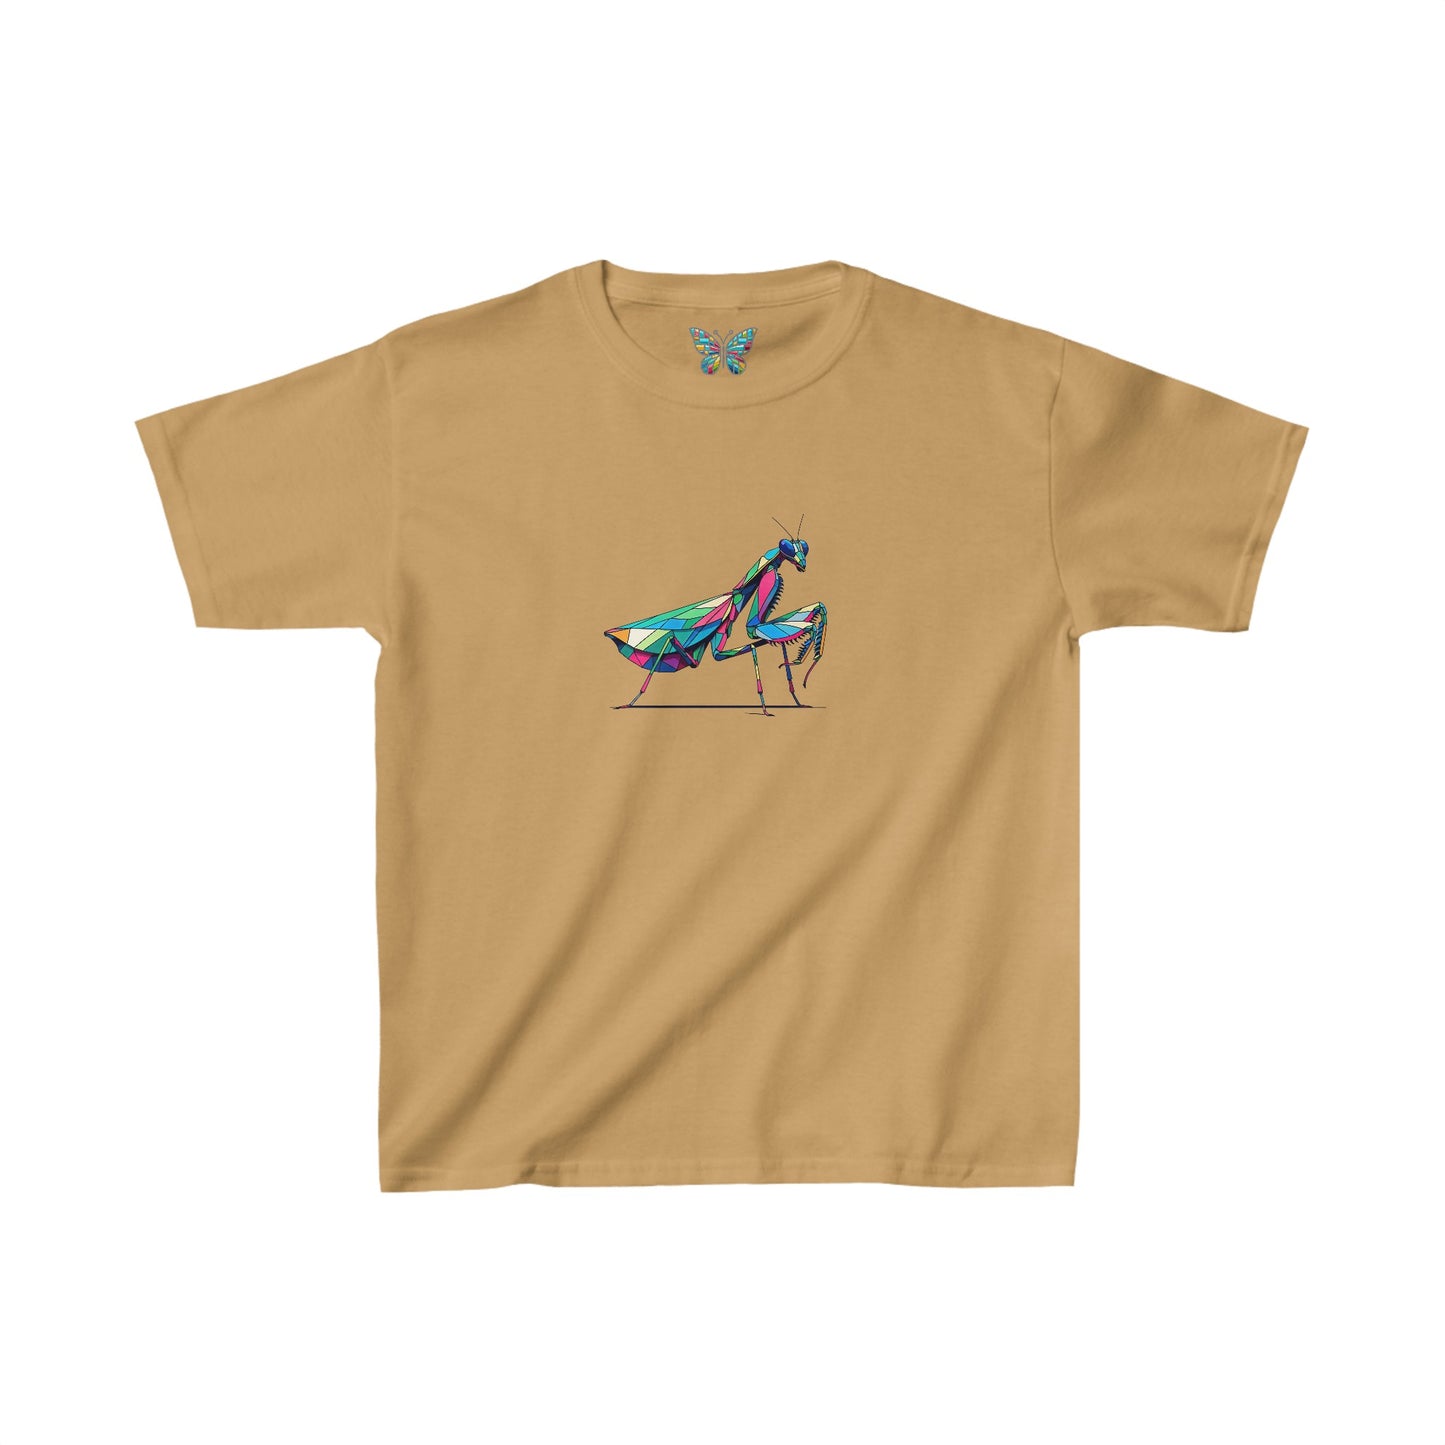 Orchid Mantis Whispervana - Youth - Snazzle Tee